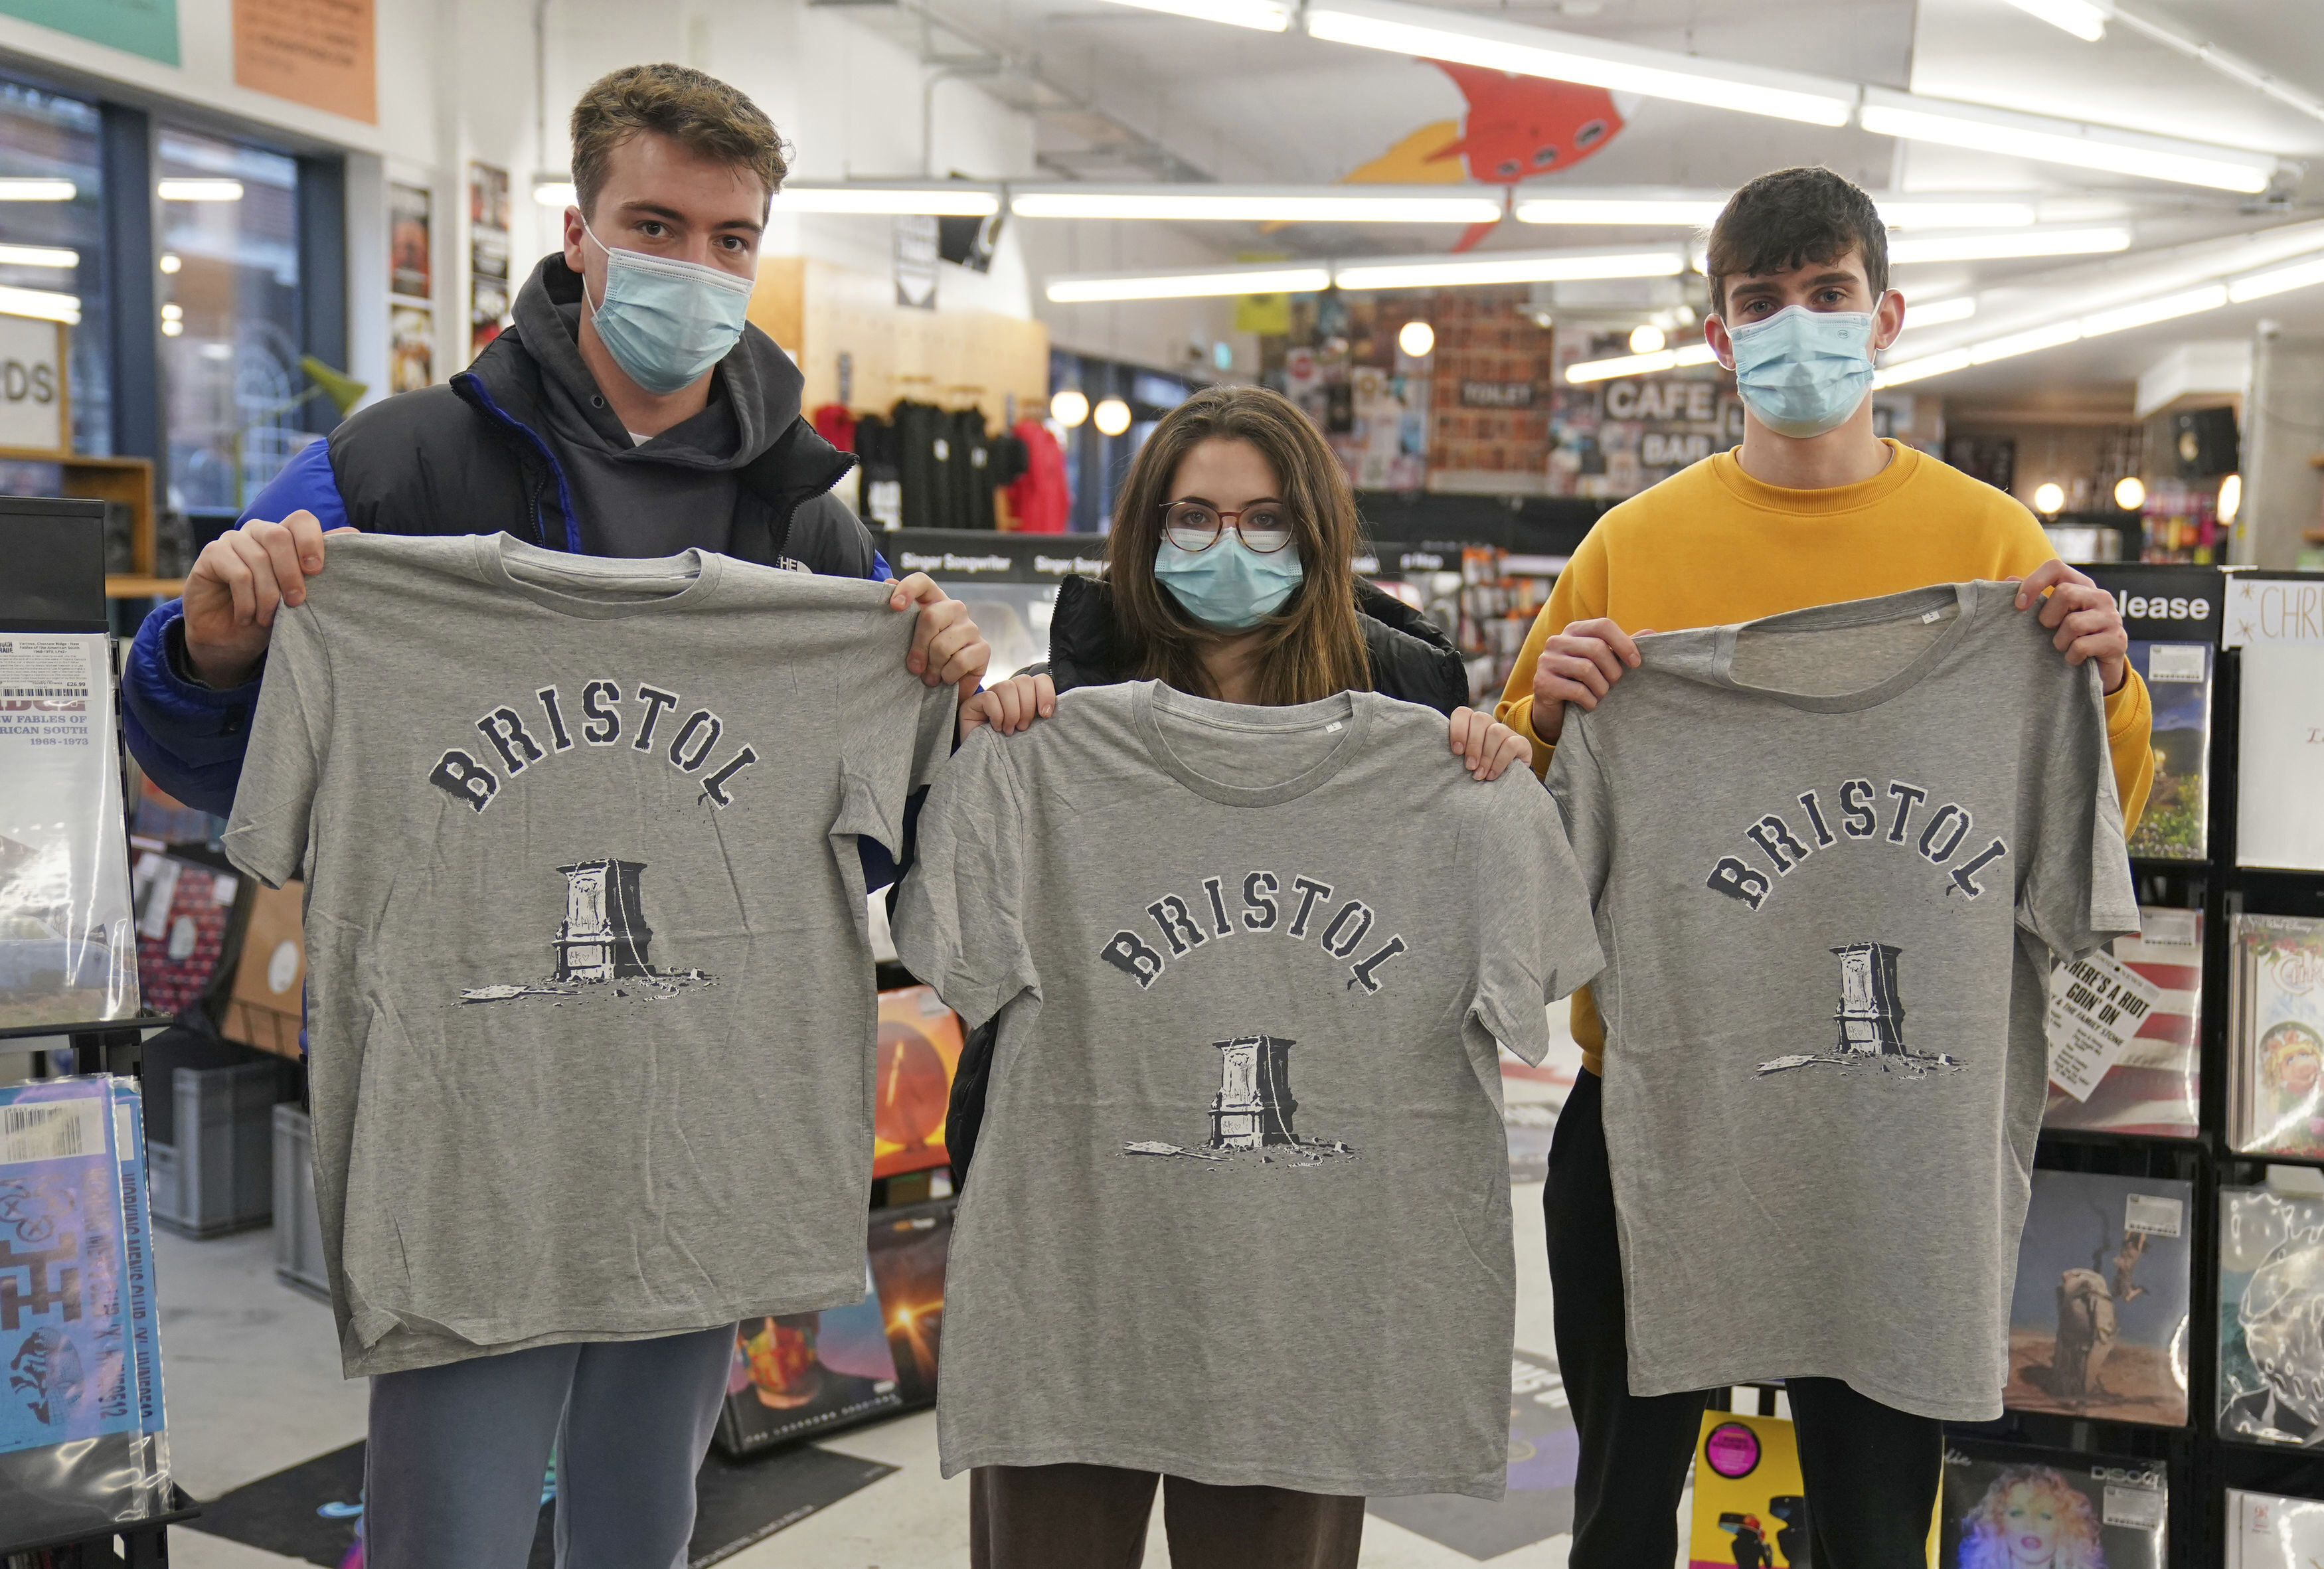 Customers inside Rough Trade in Bristol, England, Saturday Dec. 11, 2021, hold T-shirts designed by street artist Banksy